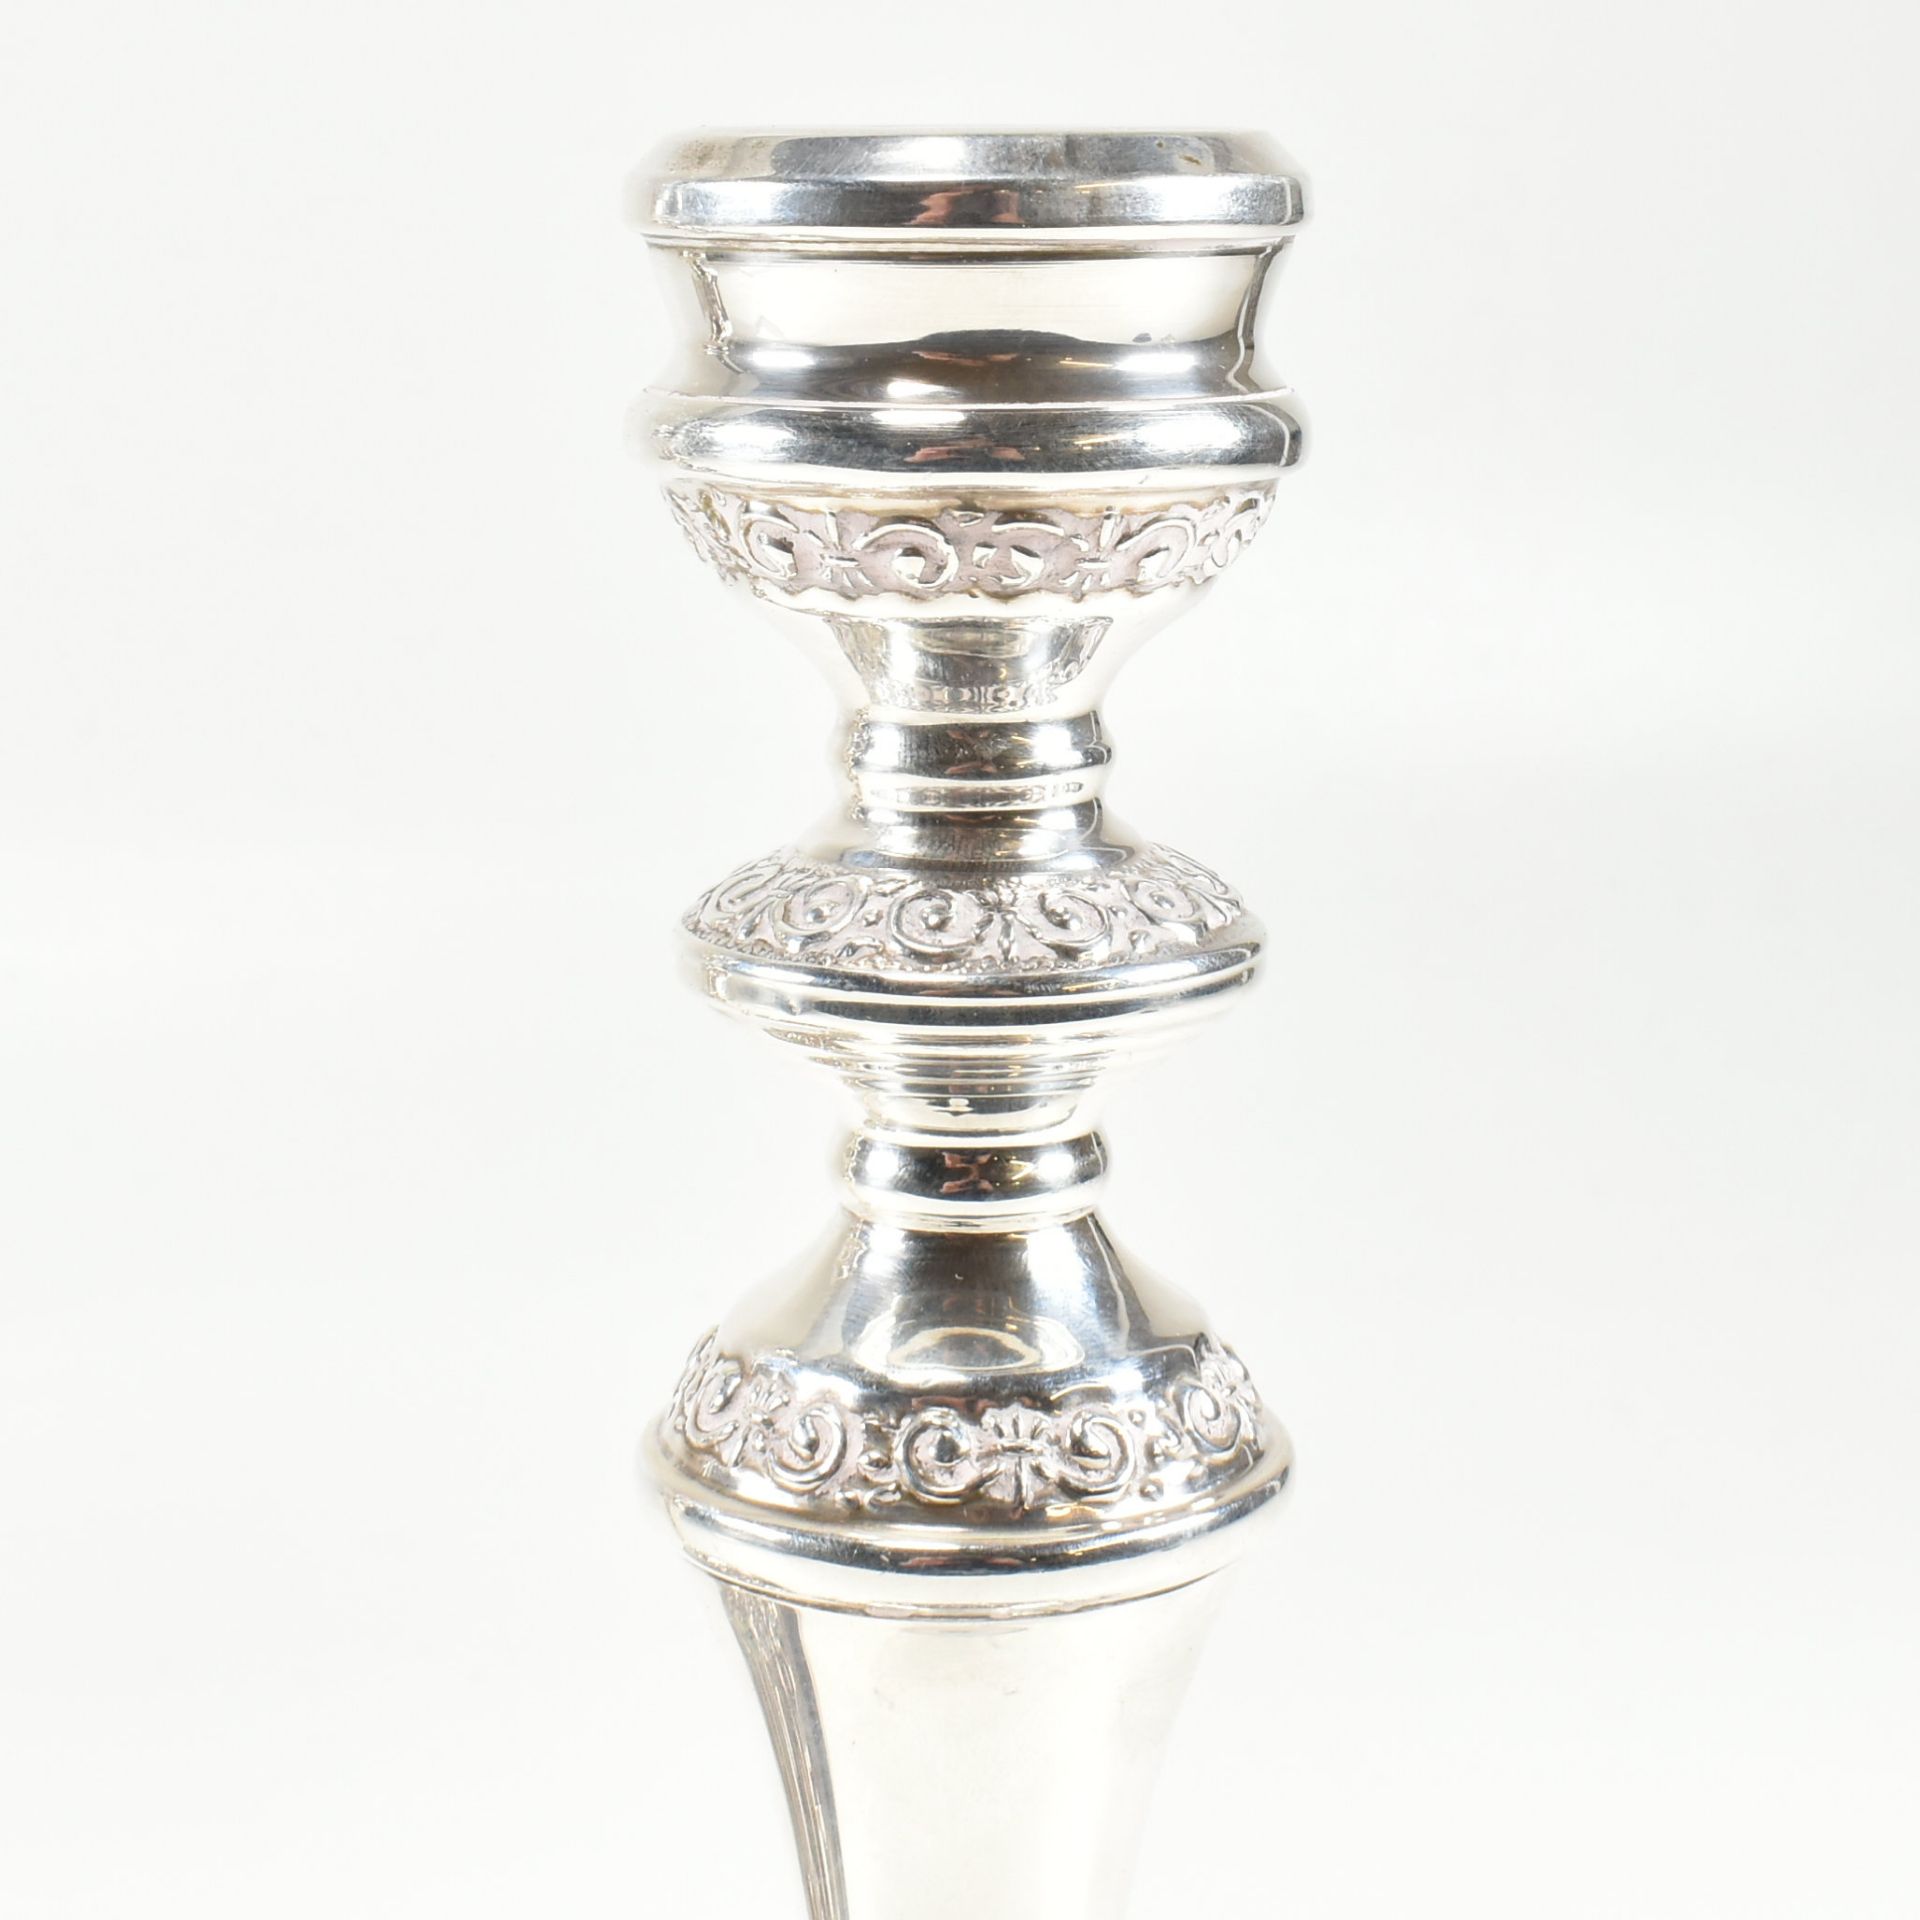 PAIR OF 1970S HALLMARKED SILVER MOUNTED CANDLESTICKS - Image 5 of 7